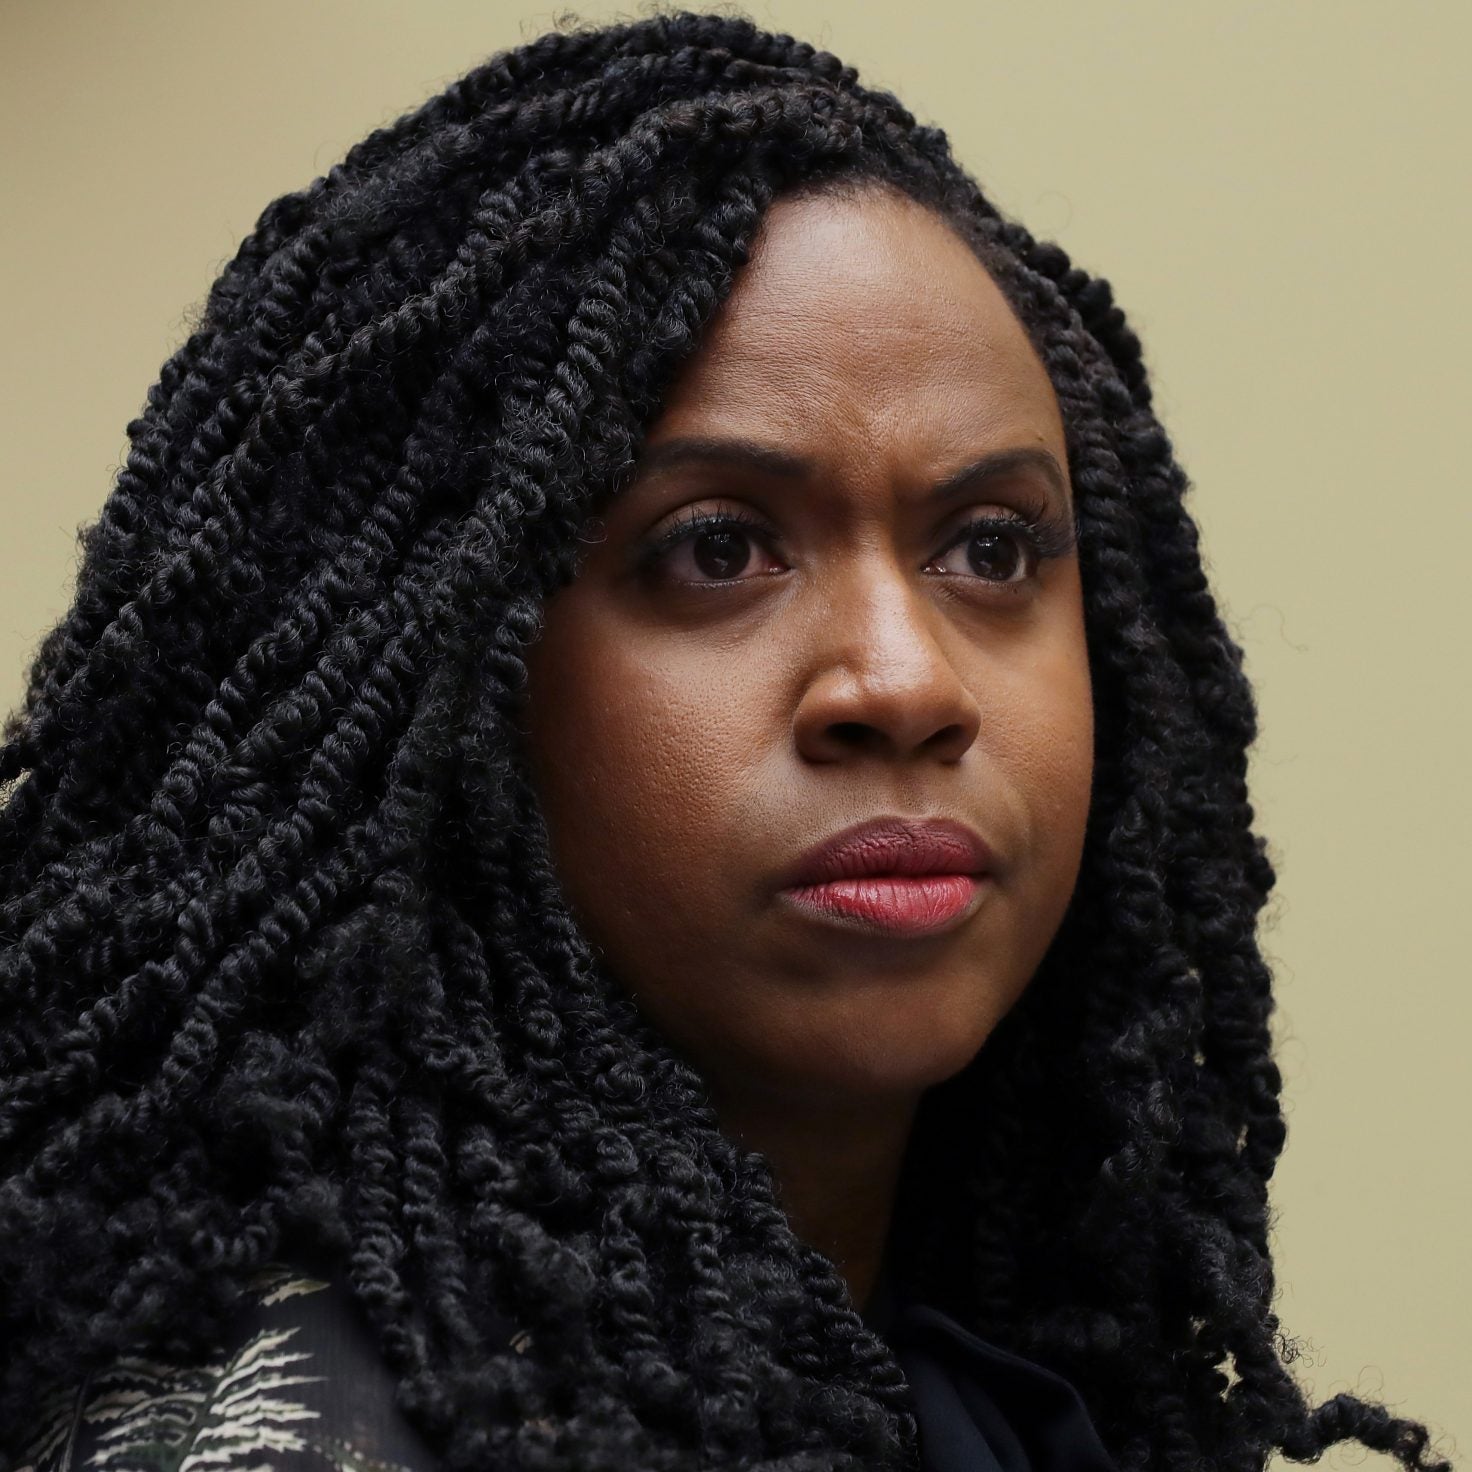 Rep. Ayanna Pressley Talks Gun Control, Immigration On 'The Daily Show'